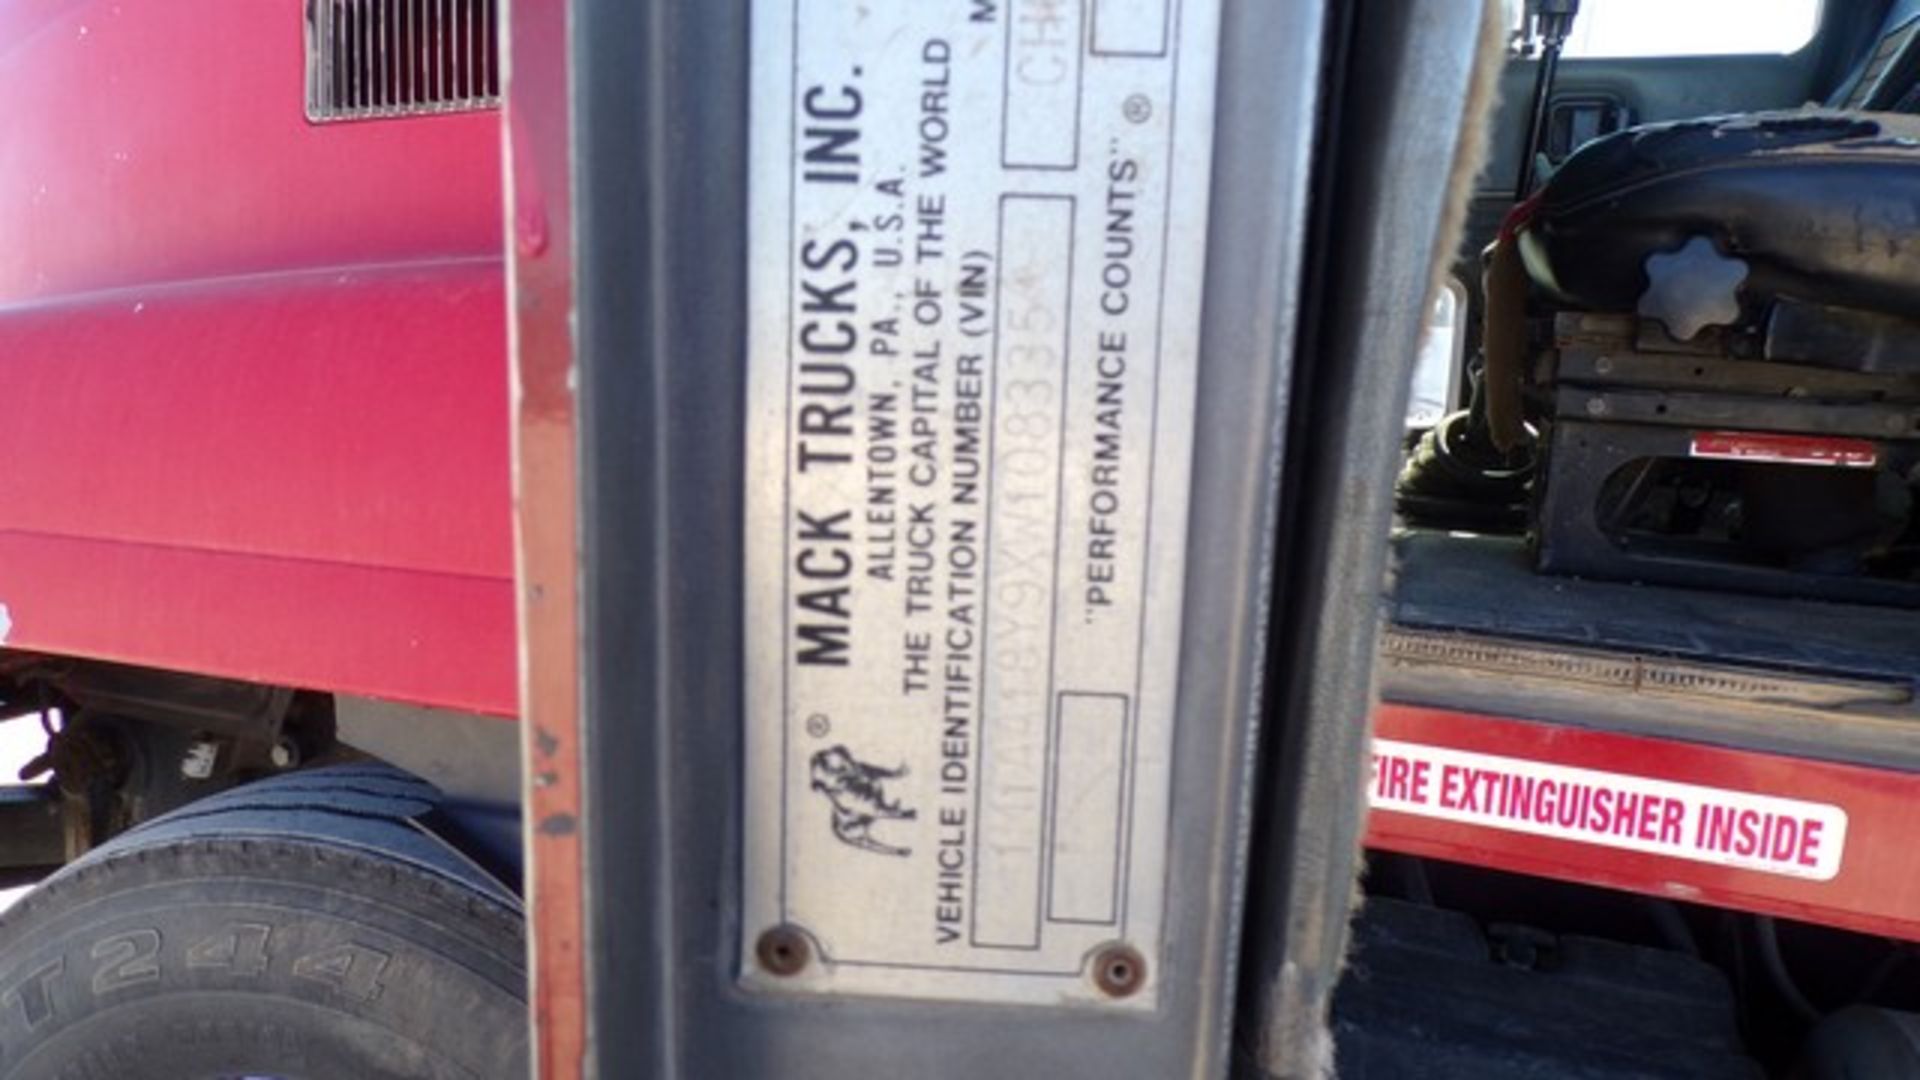 Located in YARD 1 - Midland, TX (6339) 1996 MACK CH613 T/A DAY CAB HAUL TRUCK, VIN- - Image 7 of 9